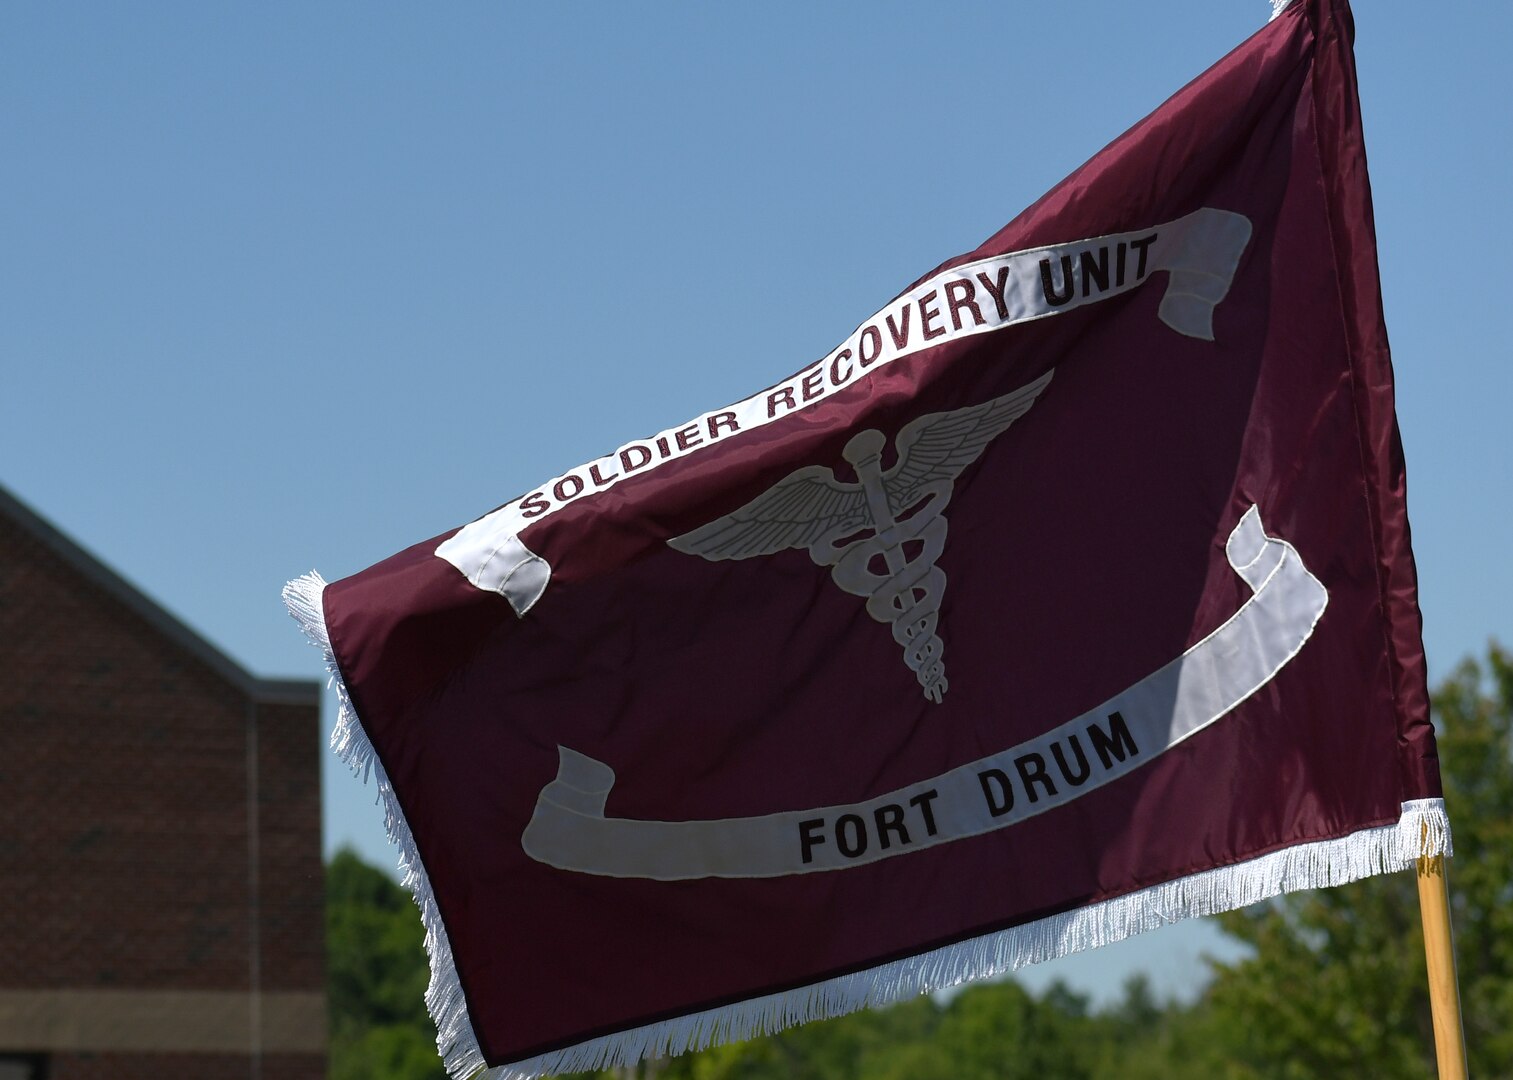 The newly uncased flag of the Fort Drum Soldier Recovery Unit (SRU) flies in front of the SRU headquarters building following a re-designation ceremony on Fort Drum, N.Y. June 16, 2020.